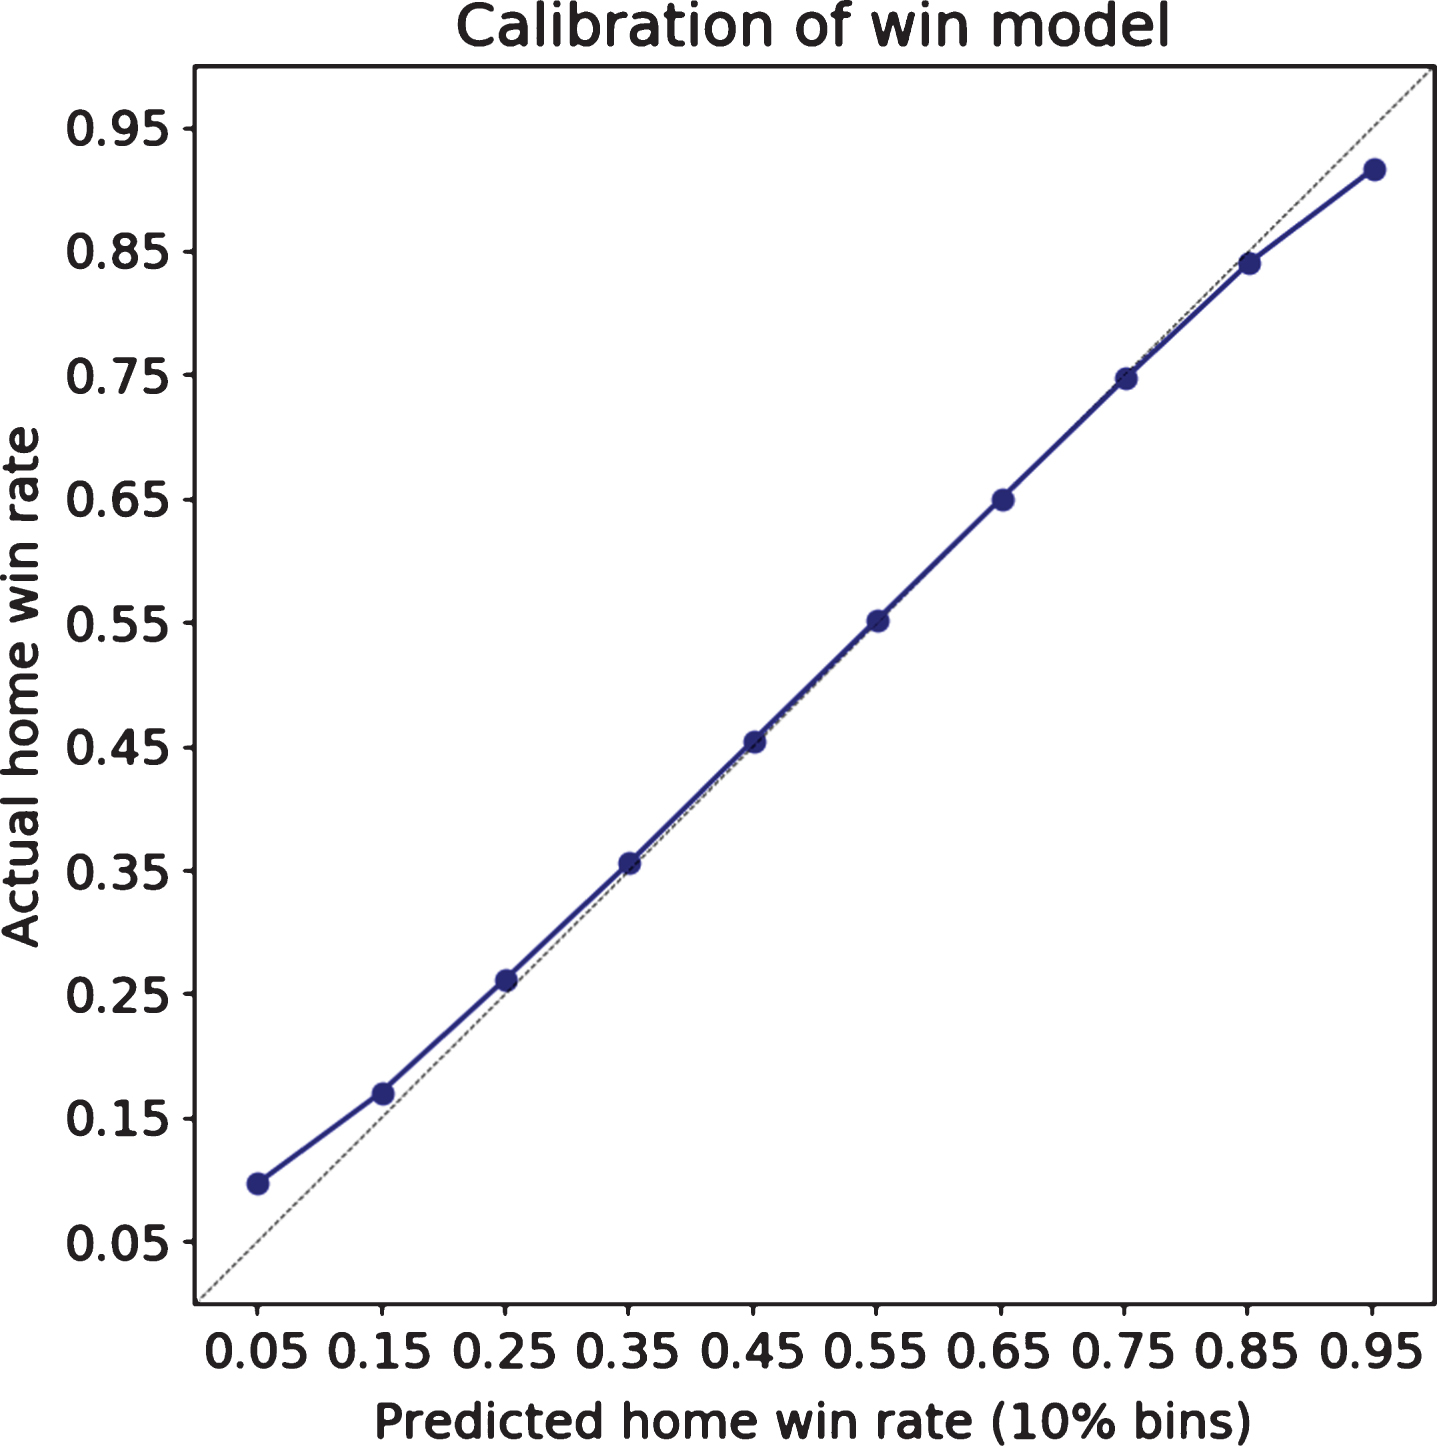 The probability of winning a given game is well-calibrated.